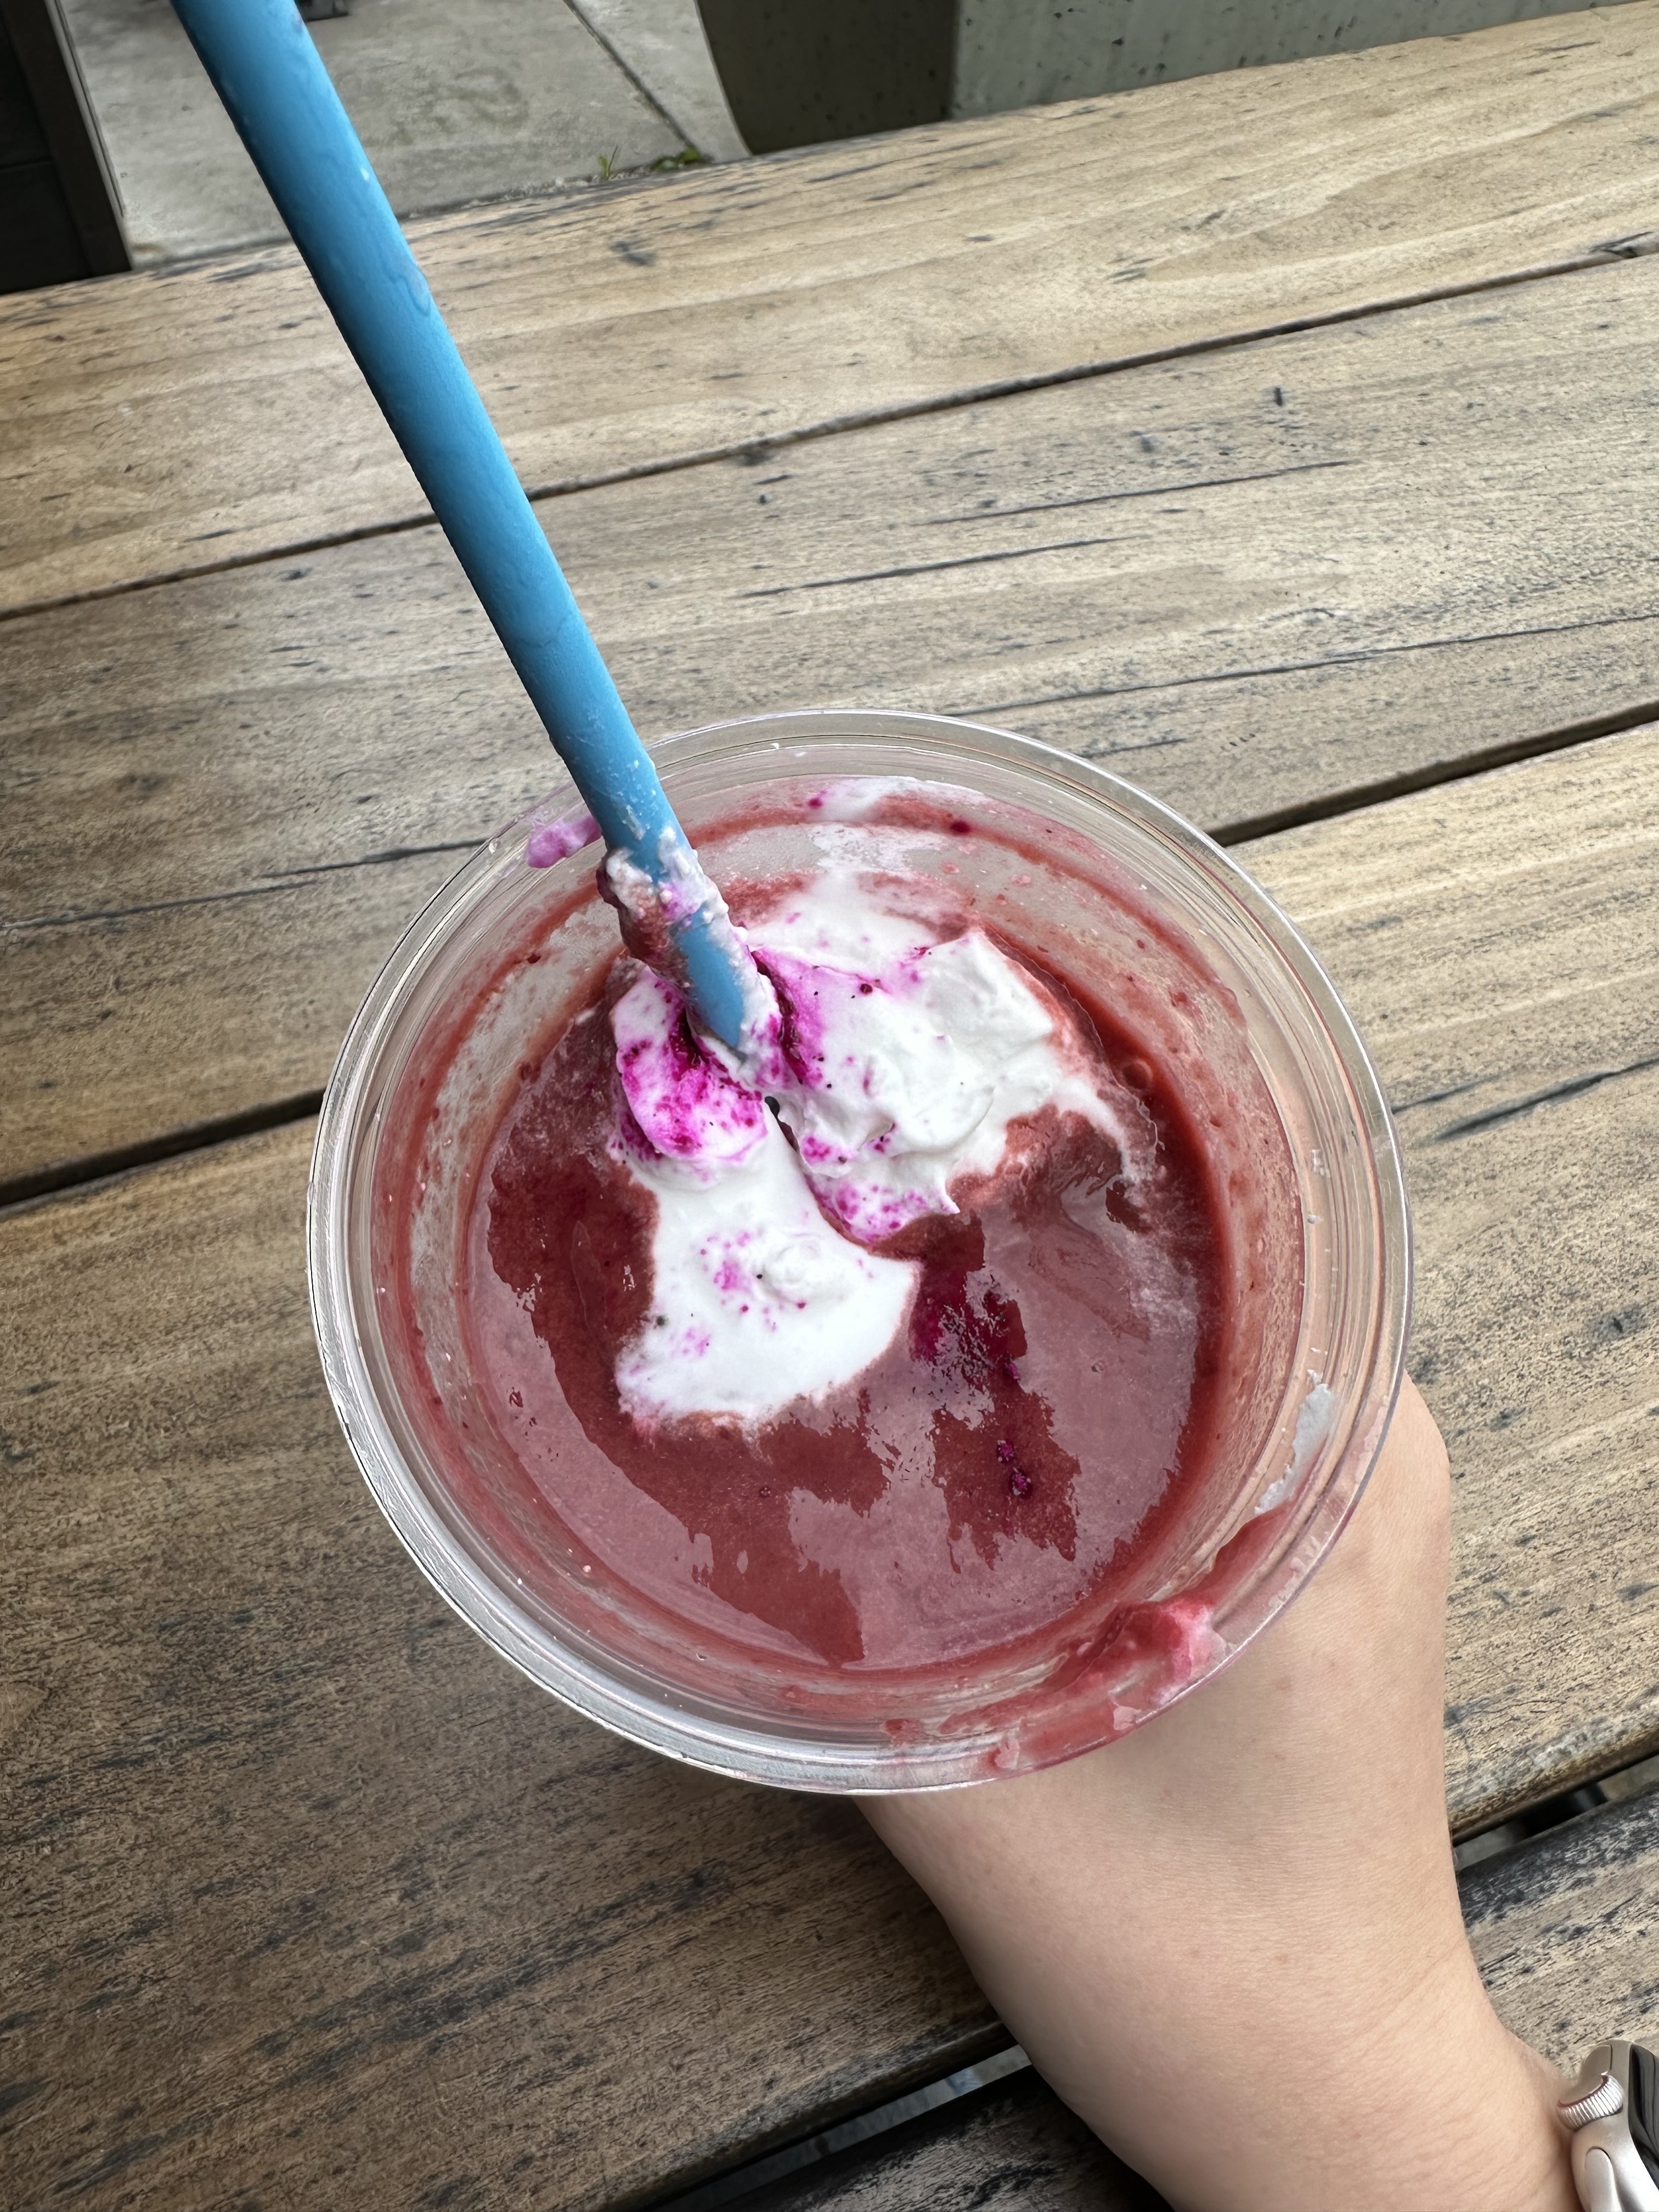 Top view of a hand holding a smoothie with a blue straw, on a wooden table